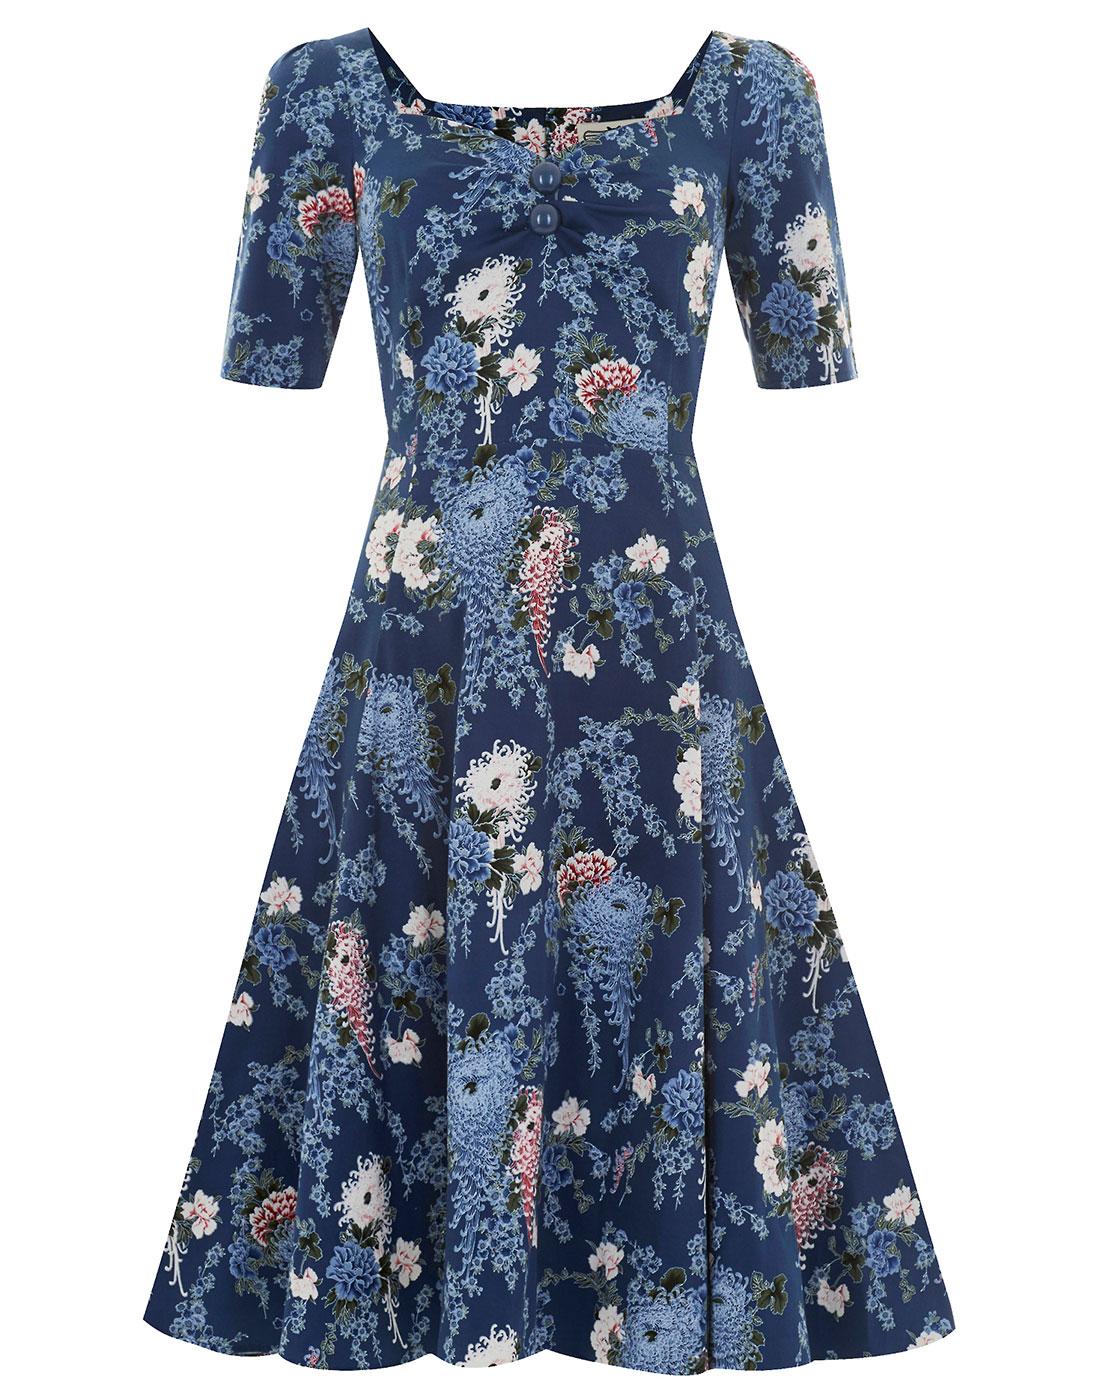 COLLECTIF Dolores Garden Floral Retro 50s Doll Dress in Blue